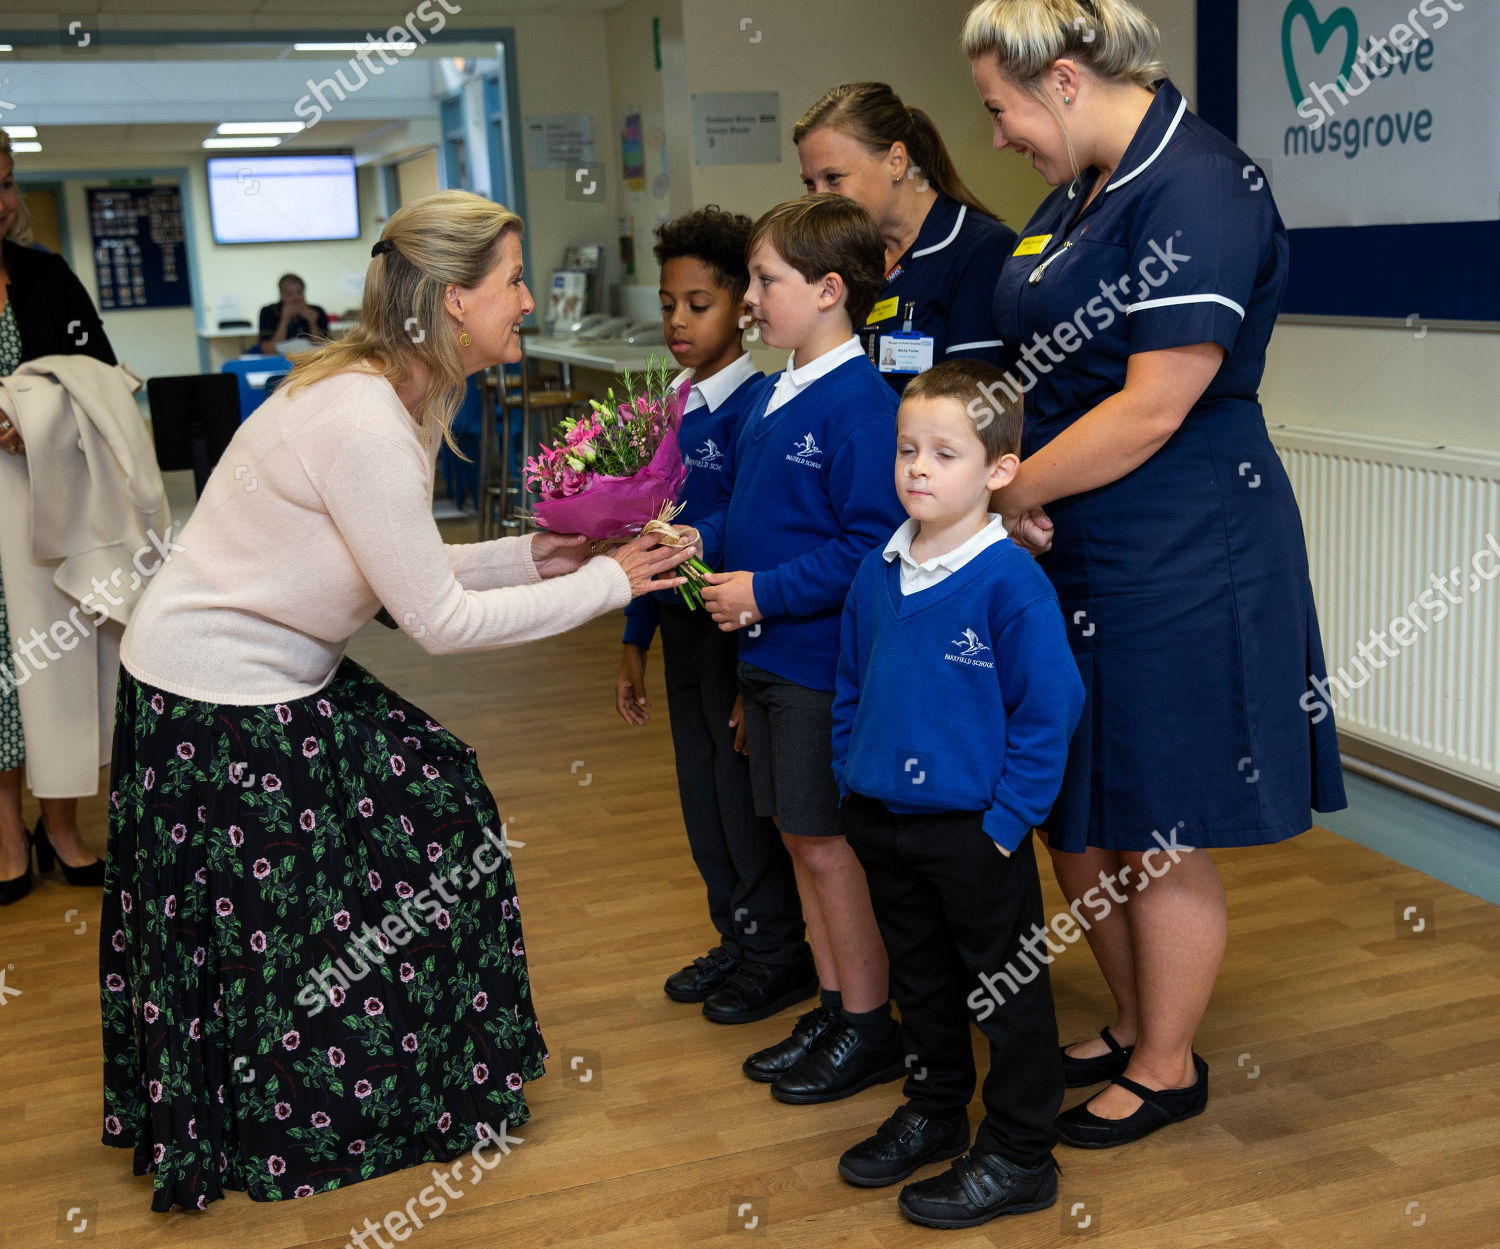 sophie-countess-of-wessex-visit-to-musgrove-park-hospital-taunton-somerset-uk-shutterstock-editorial-10422506ar.jpg